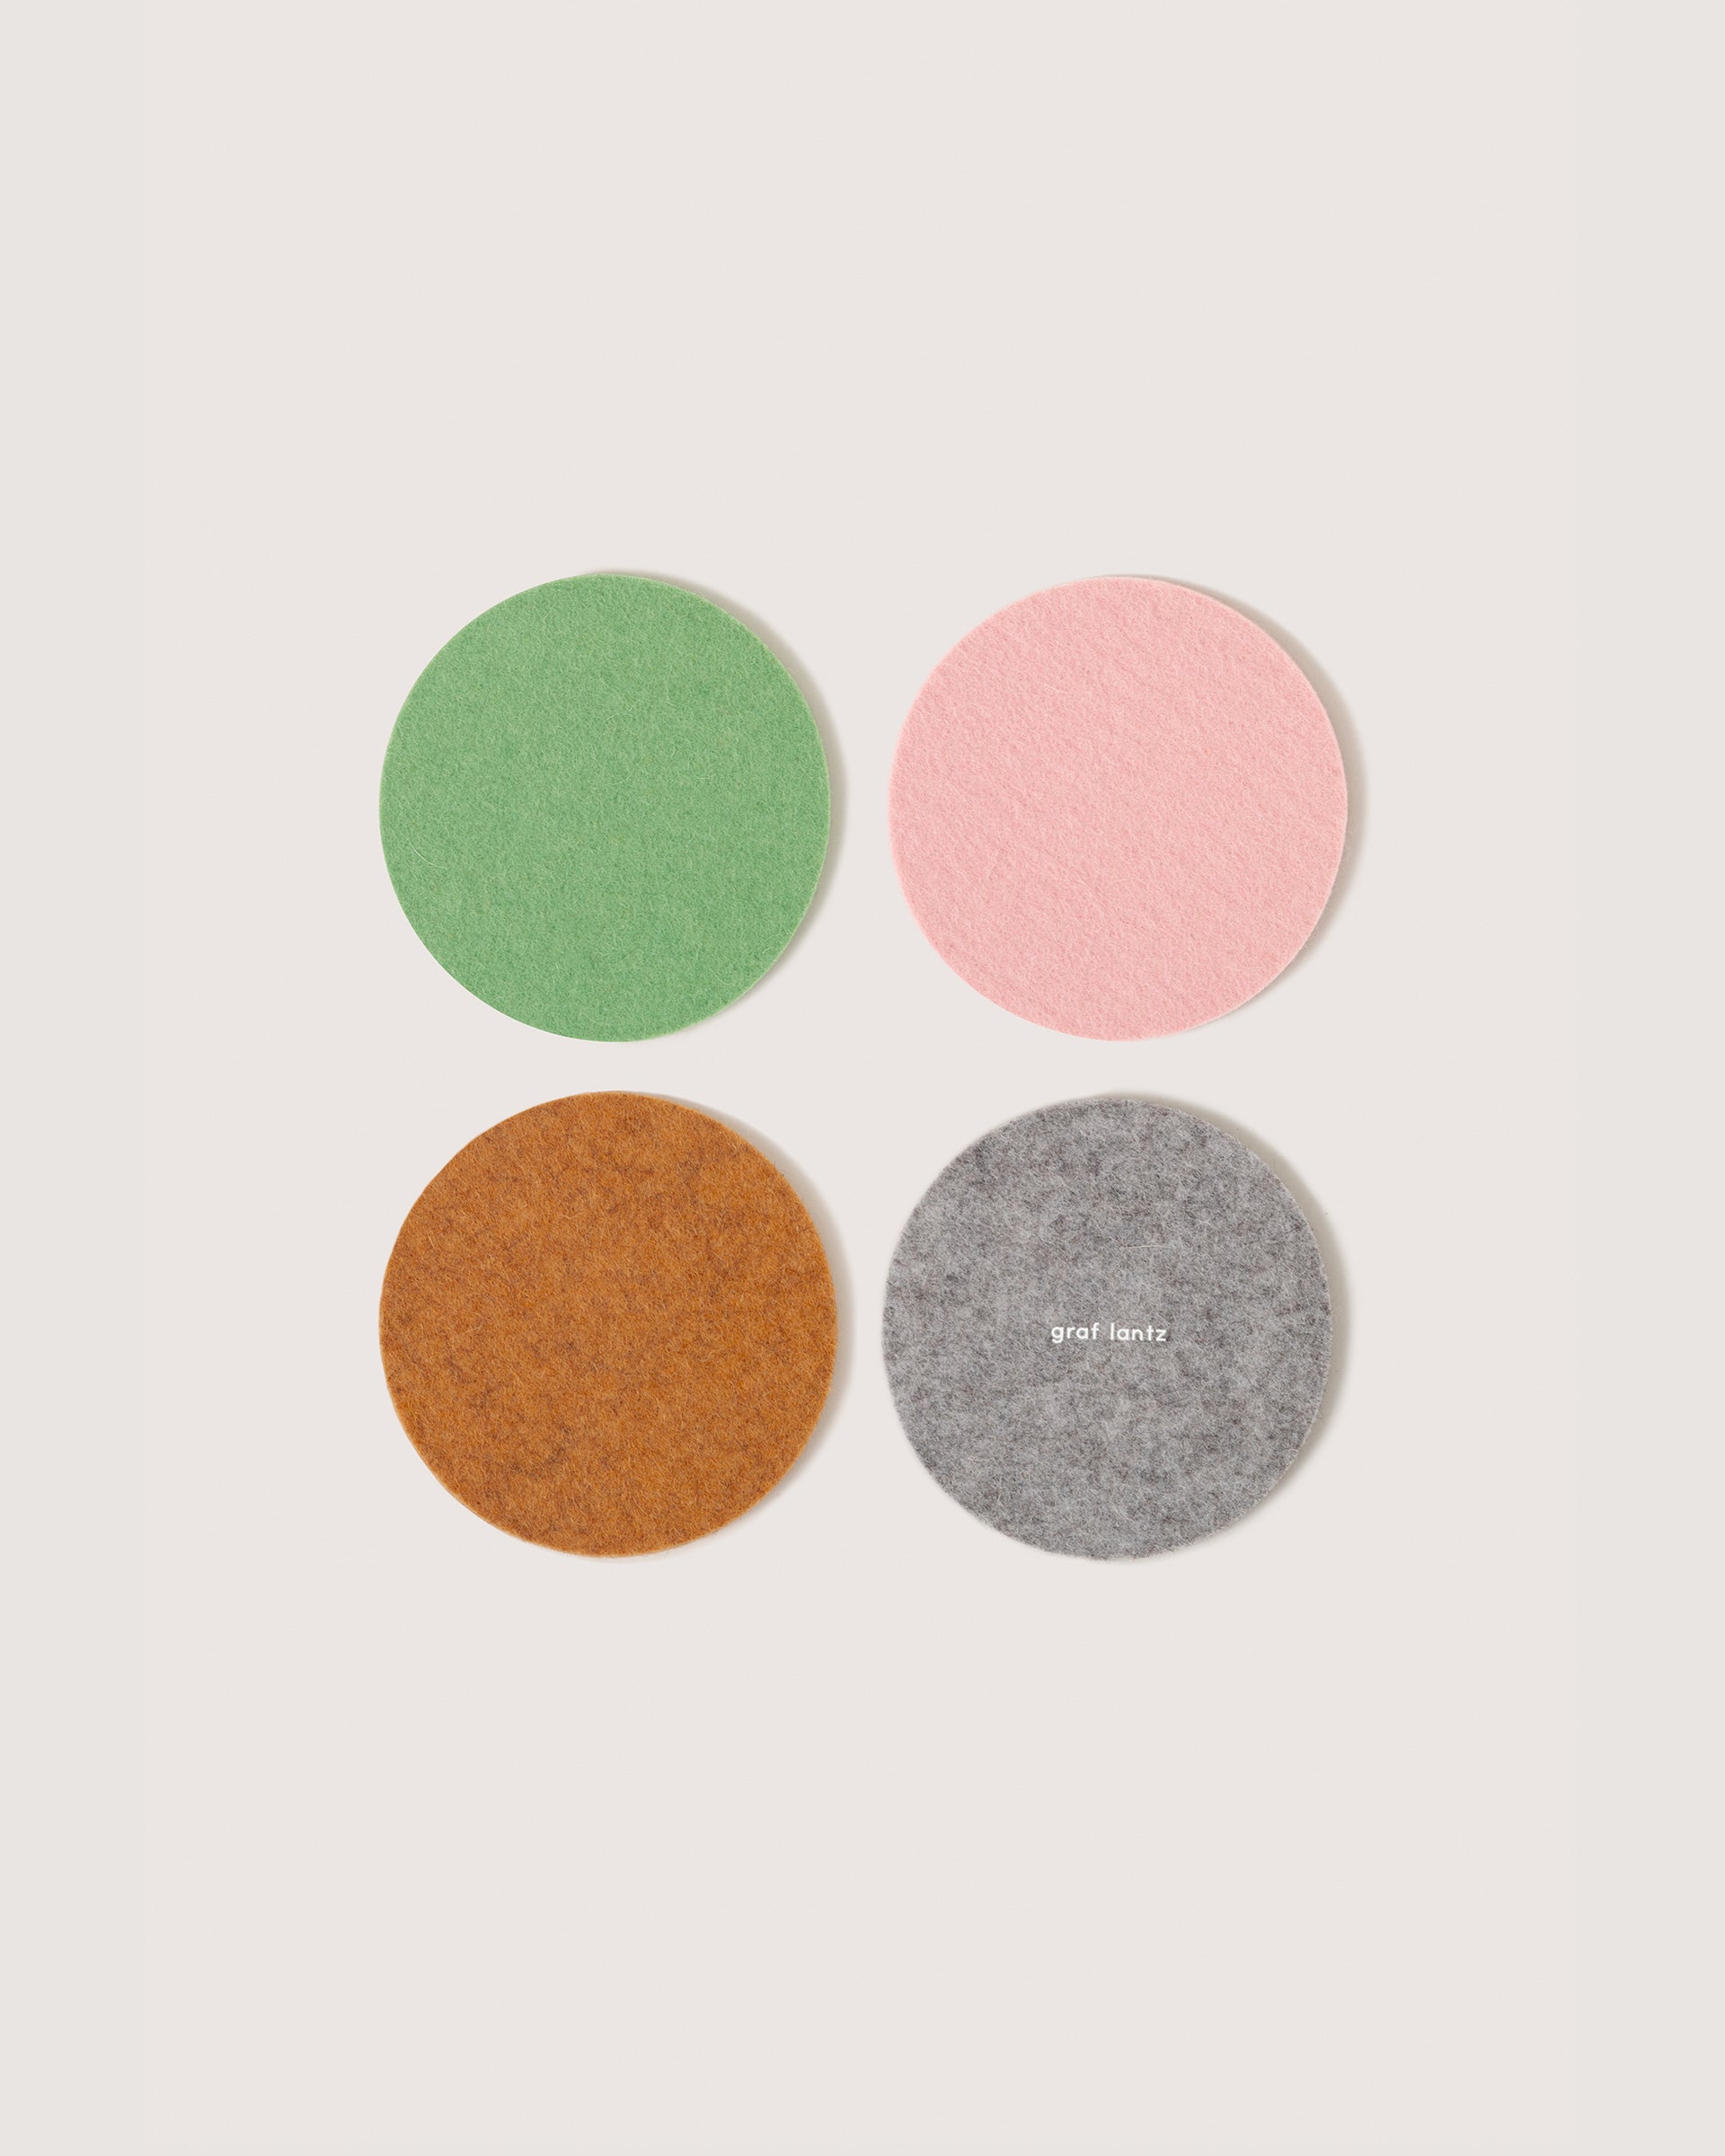 Four round felt coasters in Miso, Matcha, Rocksalt, and Granite colors, white background